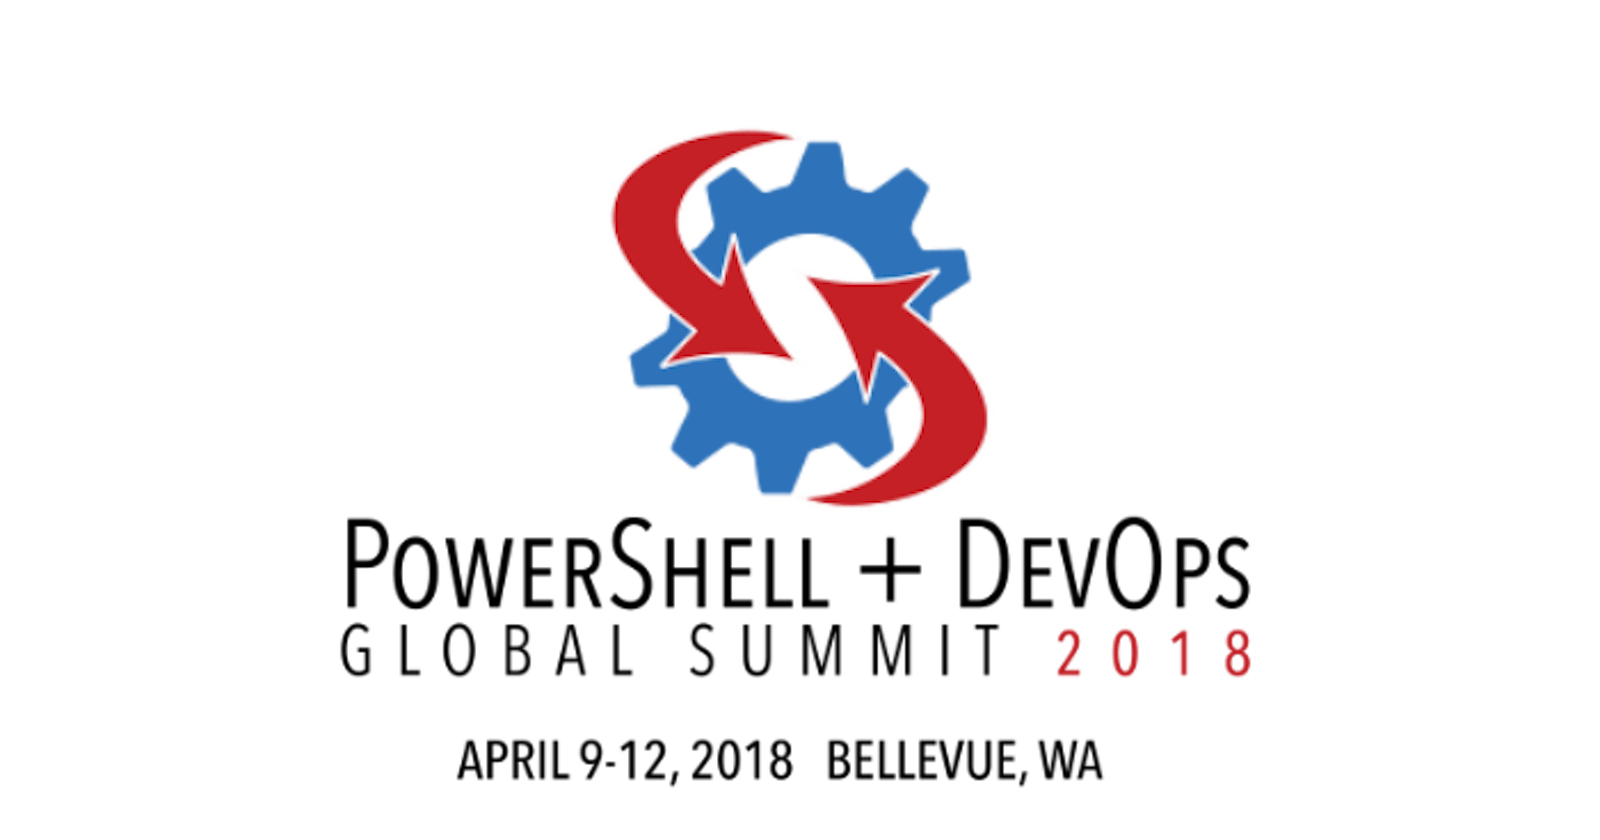 Setting Up Your Own Private, Secured Package Repository at PowerShell and DevOps Summit 2018